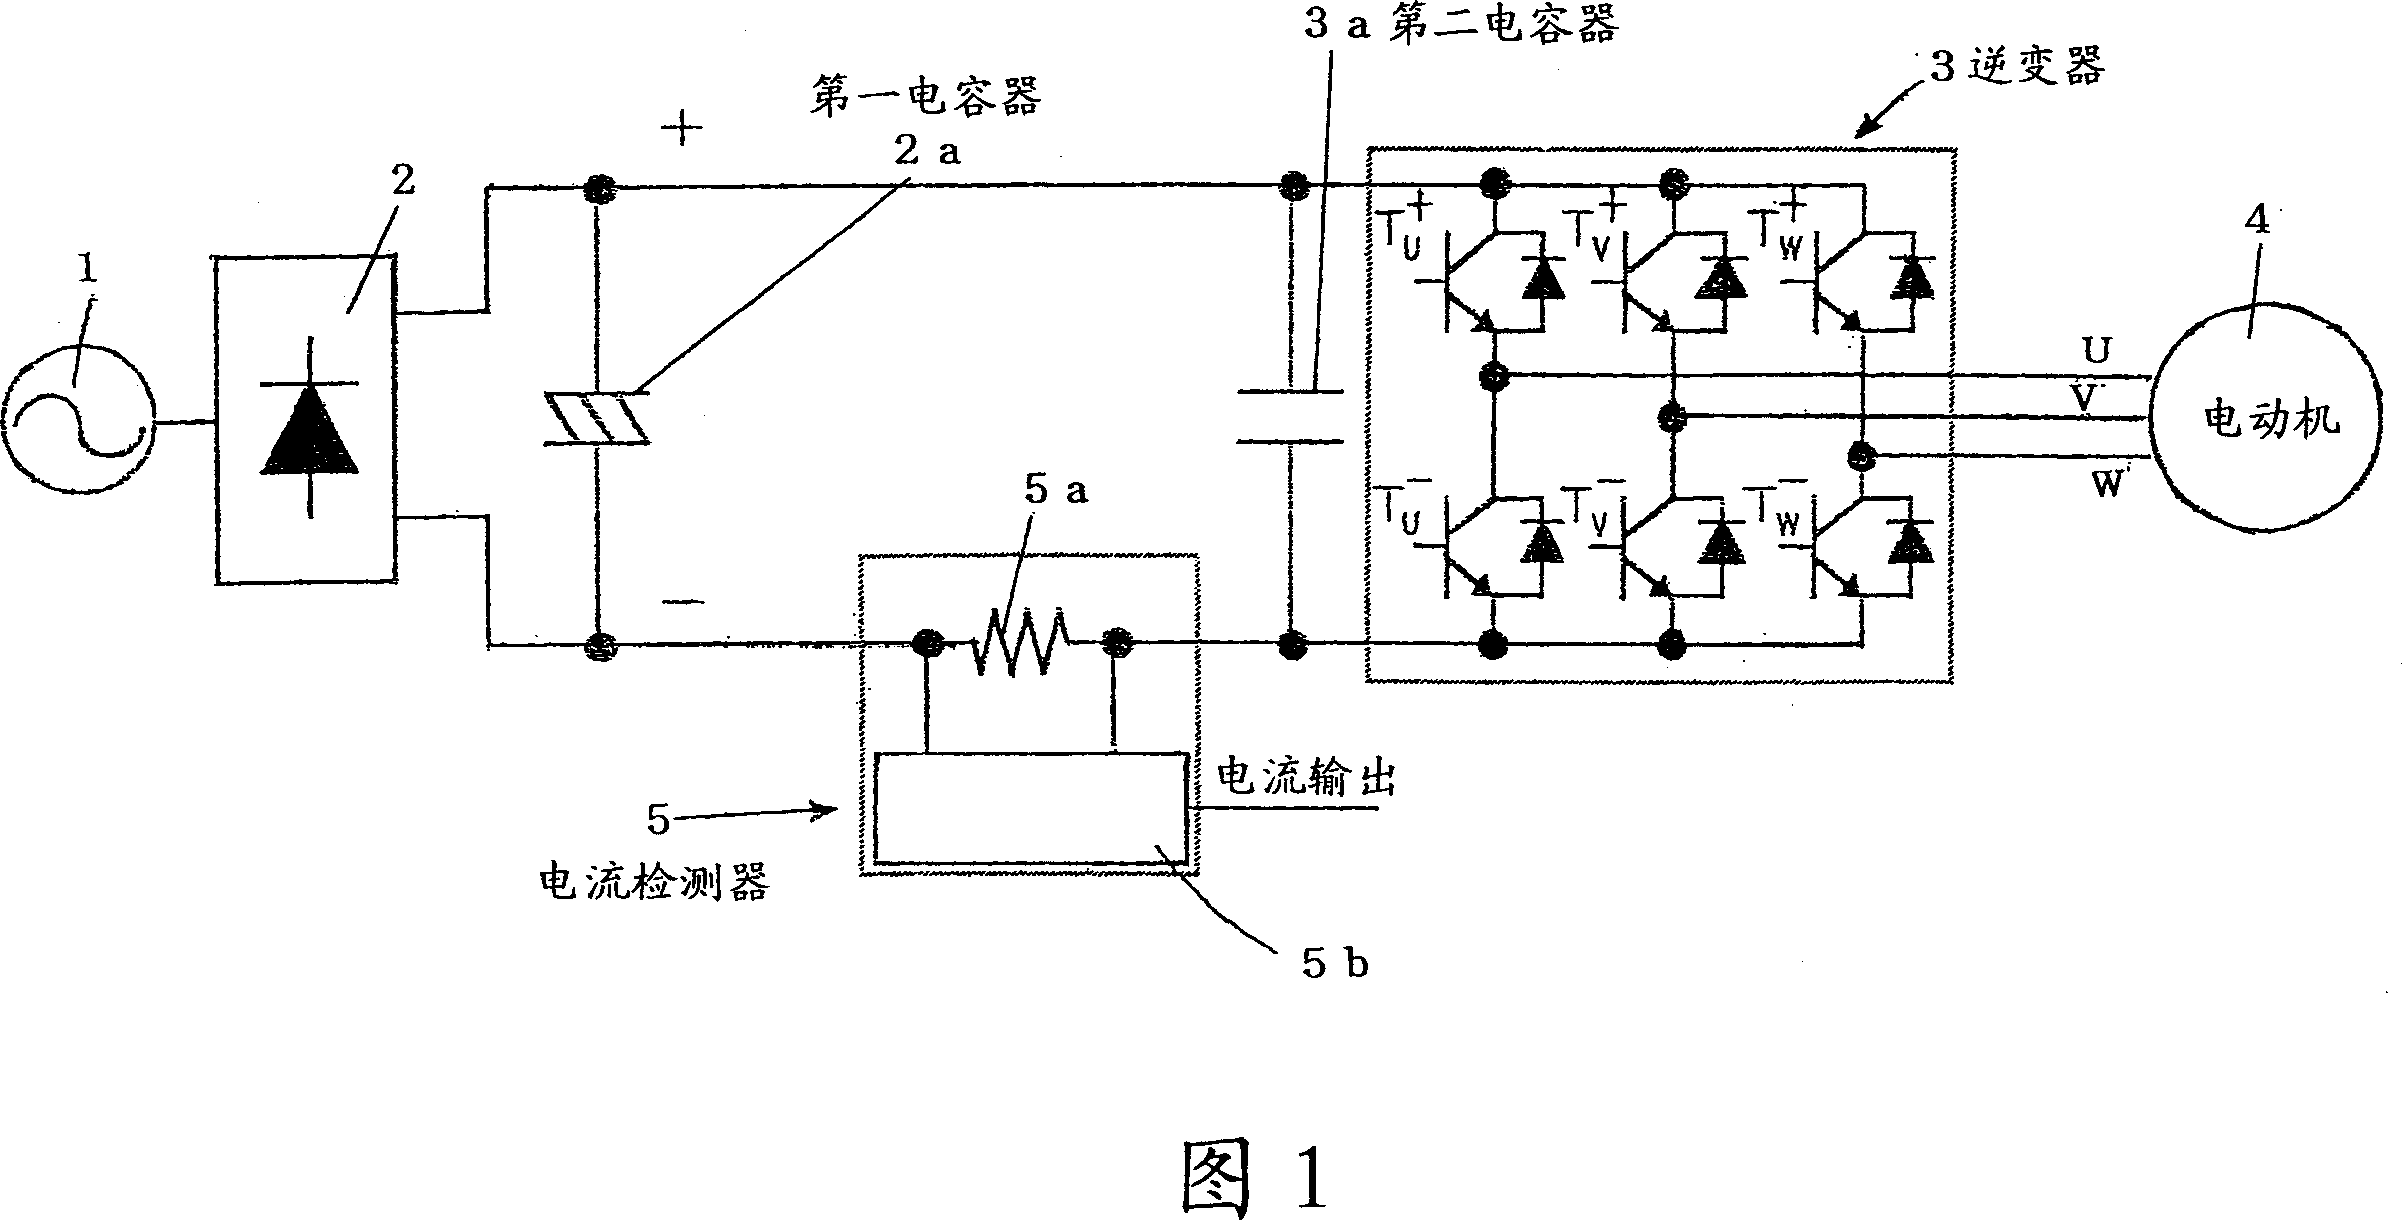 Phase current detector